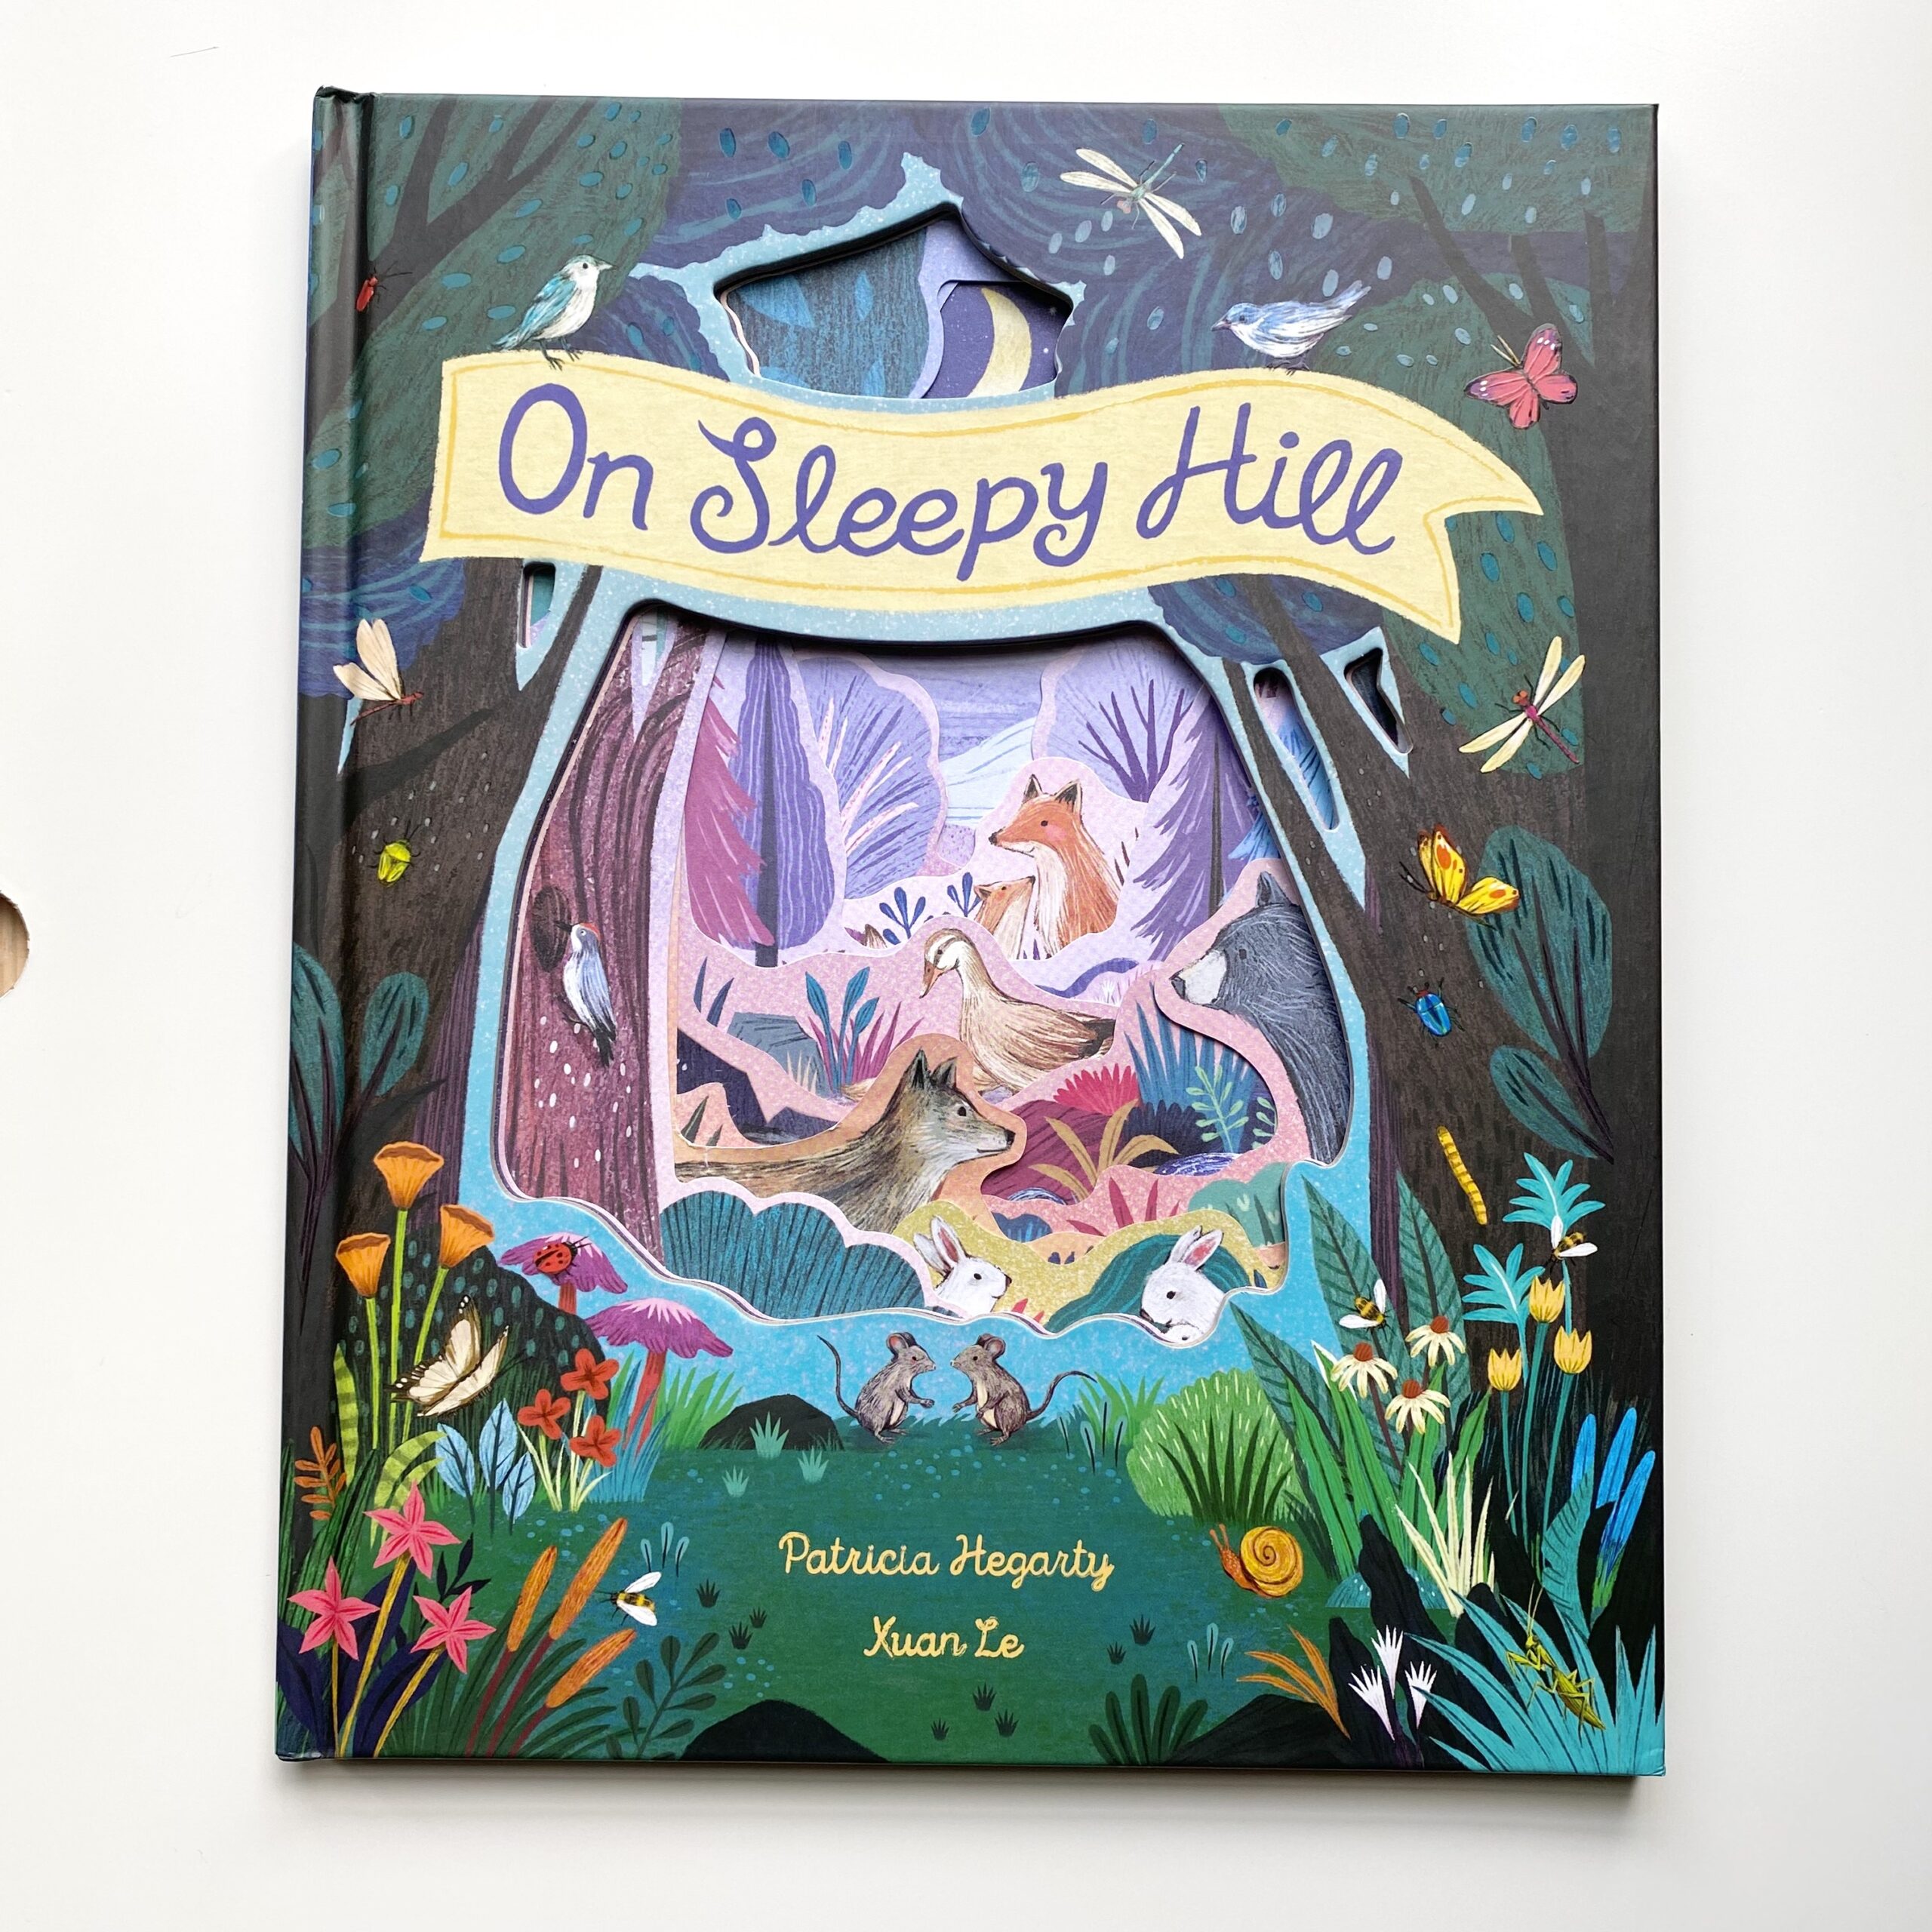 On Sleepy Hill Book by Patricia Hegarty and Xuan Le.